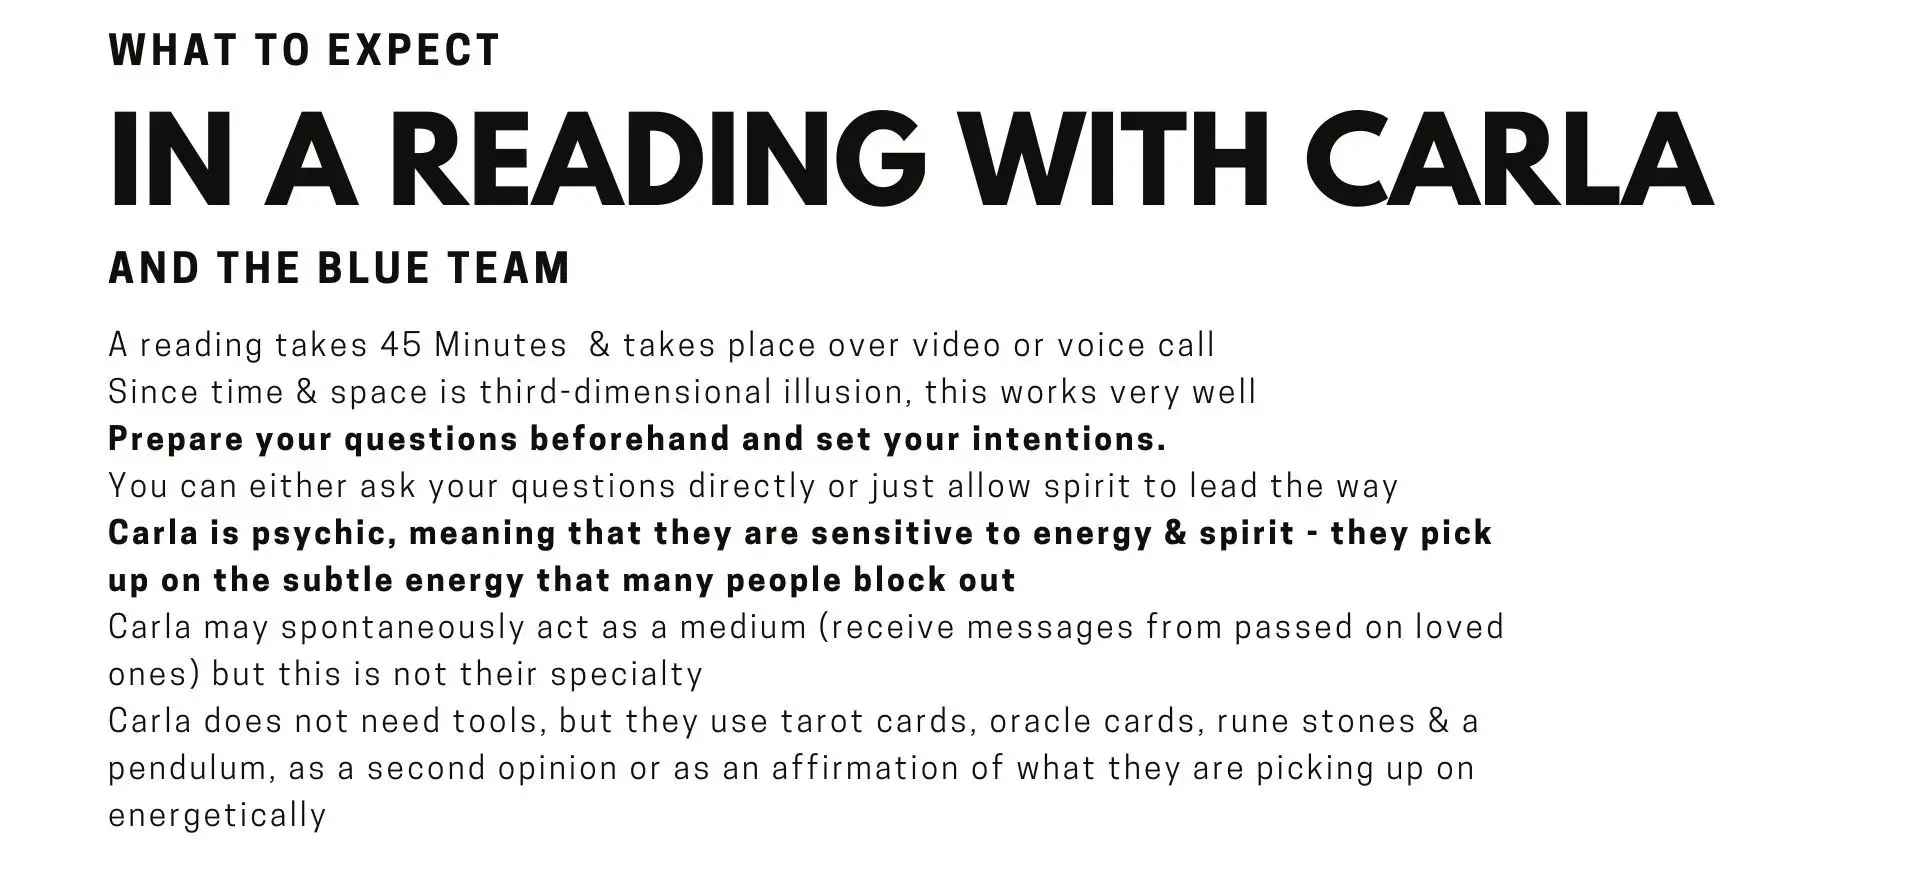 What to expect in a Reading with Psychic Carla and the Blue Team A reading takes 45 Minutes  & takes place over video or voice call Since time & space is third-dimensional illusion, this works very well Ask as many questions as you like within your timeframe You can either ask your questions directly or just allow a full tarot spread to lead the way Carla is psychic, meaning that they are sensitive to energy & spirit - they pick up on the subtle energy that many people miss out on Carla sometimes acts as a medium spontaneously (receives messages from passed on loved ones) but this is not their specialty, it is a bonus when it comes through Carla does not need tools, but they use the tarot cards, rune stones & a pendulum, as a second opinion or as an affirmation of what they are picking up on energetically.    